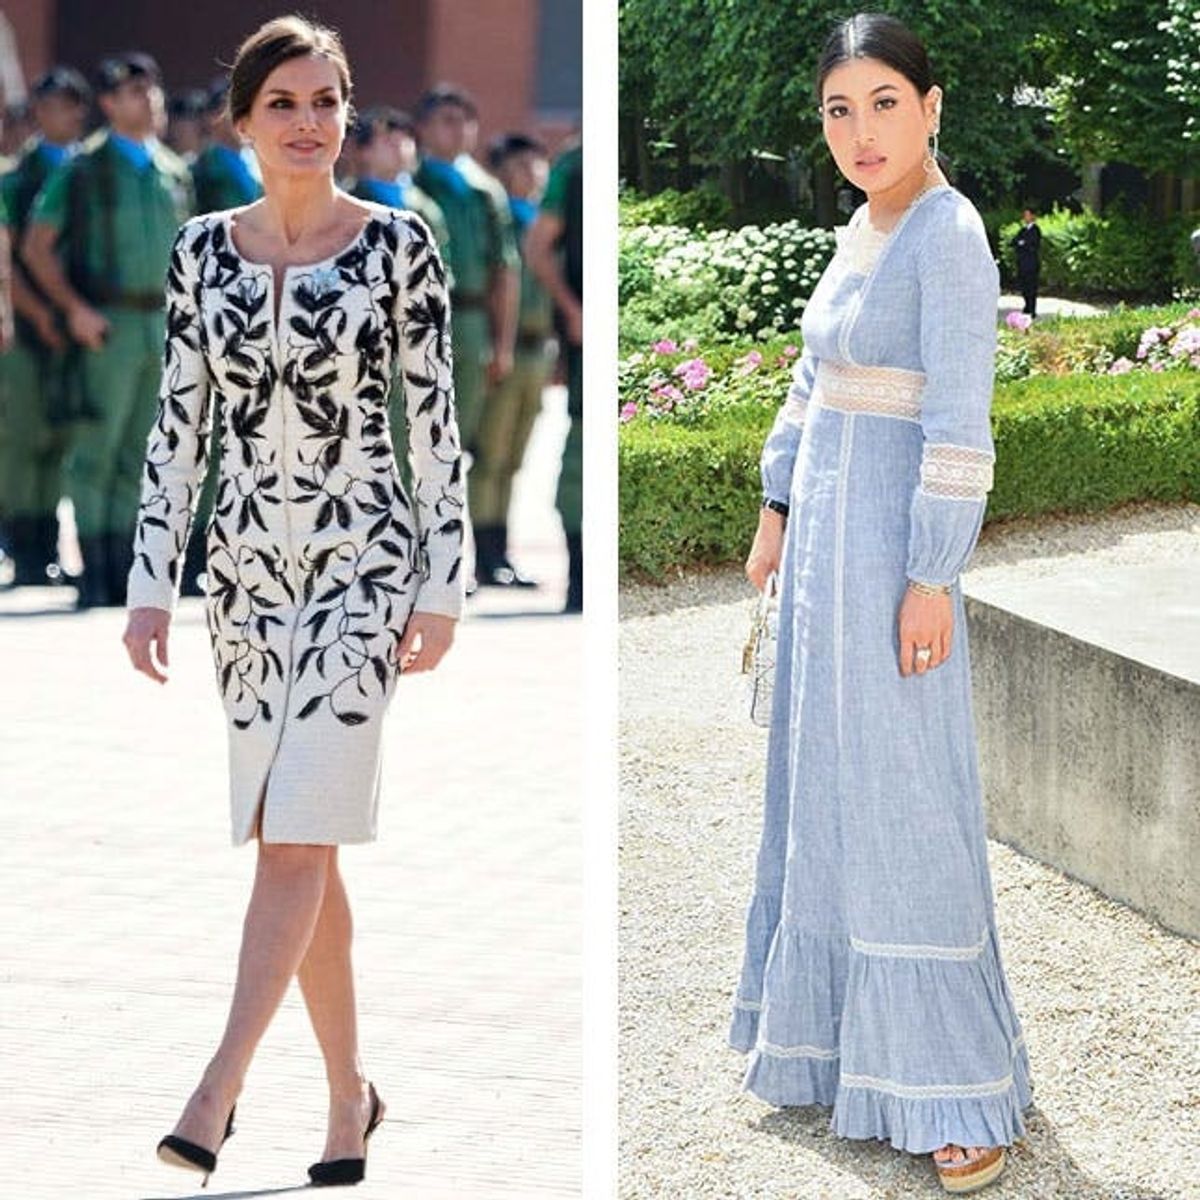 The Most Fashionable Royals That Aren’t Kate Middleton or Meghan Markle